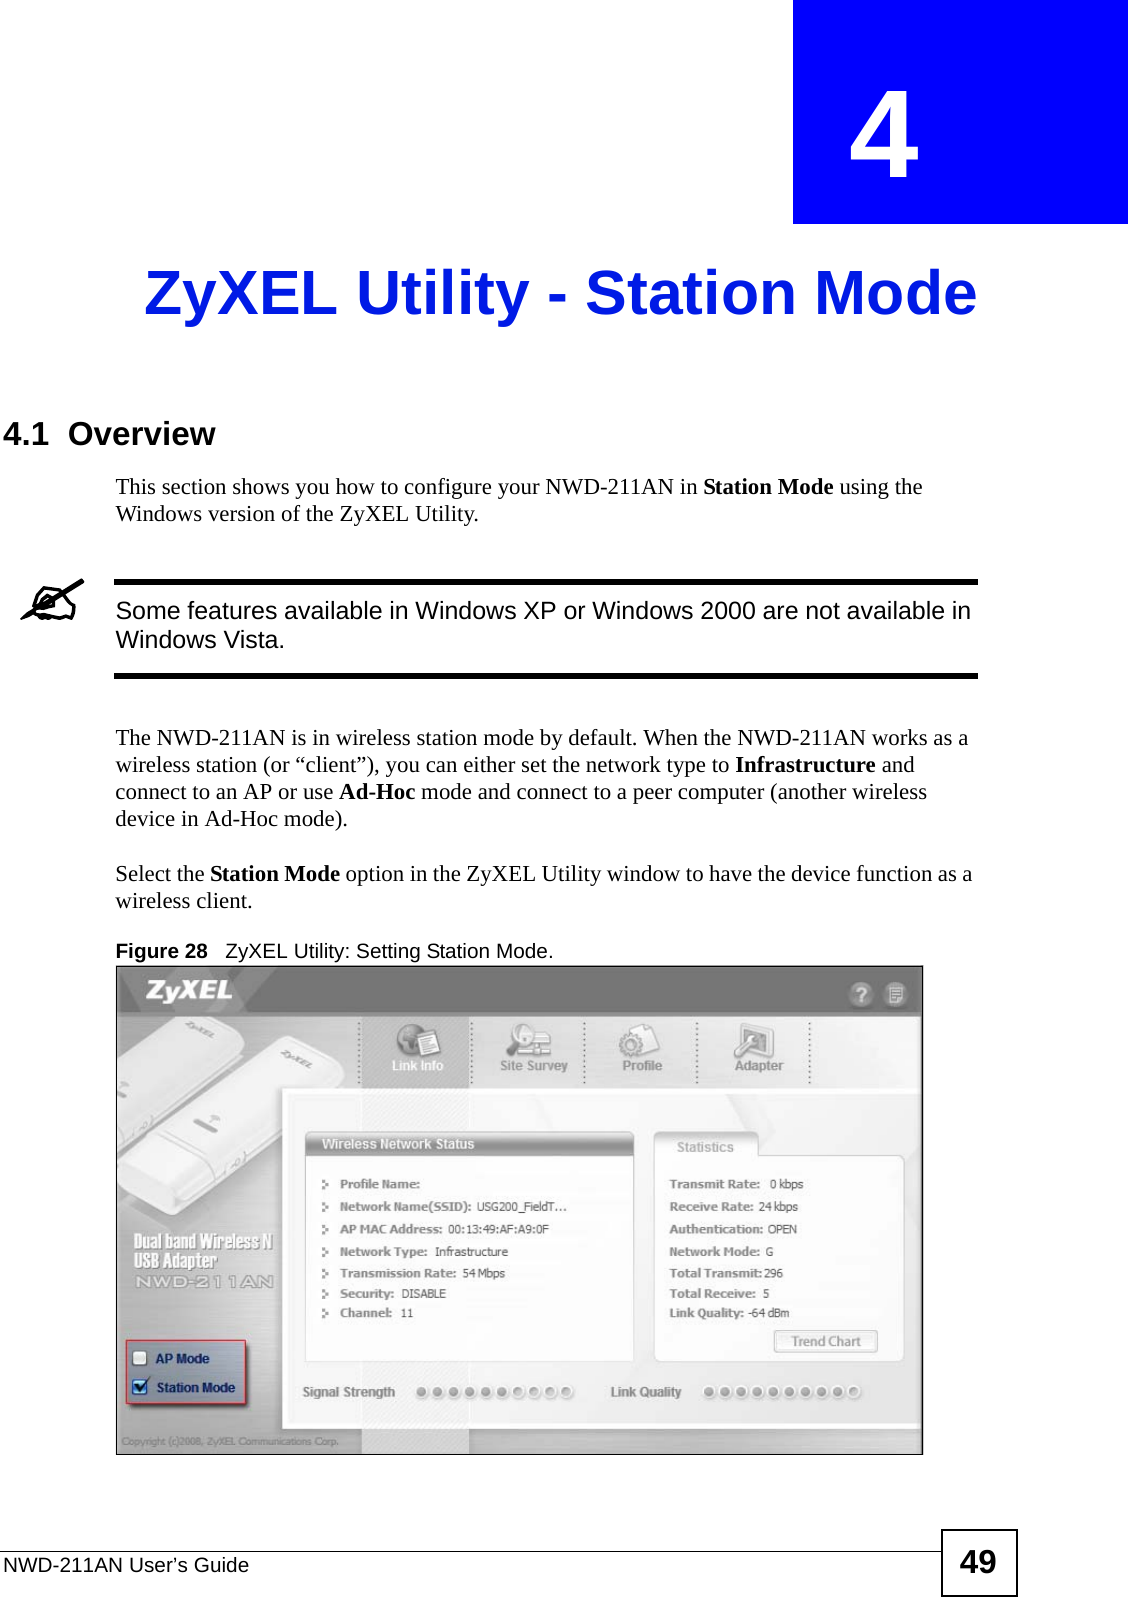 NWD-211AN User’s Guide 49CHAPTER  4 ZyXEL Utility - Station Mode4.1  OverviewThis section shows you how to configure your NWD-211AN in Station Mode using the Windows version of the ZyXEL Utility.&quot;Some features available in Windows XP or Windows 2000 are not available in Windows Vista.The NWD-211AN is in wireless station mode by default. When the NWD-211AN works as a wireless station (or “client”), you can either set the network type to Infrastructure and connect to an AP or use Ad-Hoc mode and connect to a peer computer (another wireless device in Ad-Hoc mode).Select the Station Mode option in the ZyXEL Utility window to have the device function as a wireless client.Figure 28   ZyXEL Utility: Setting Station Mode.